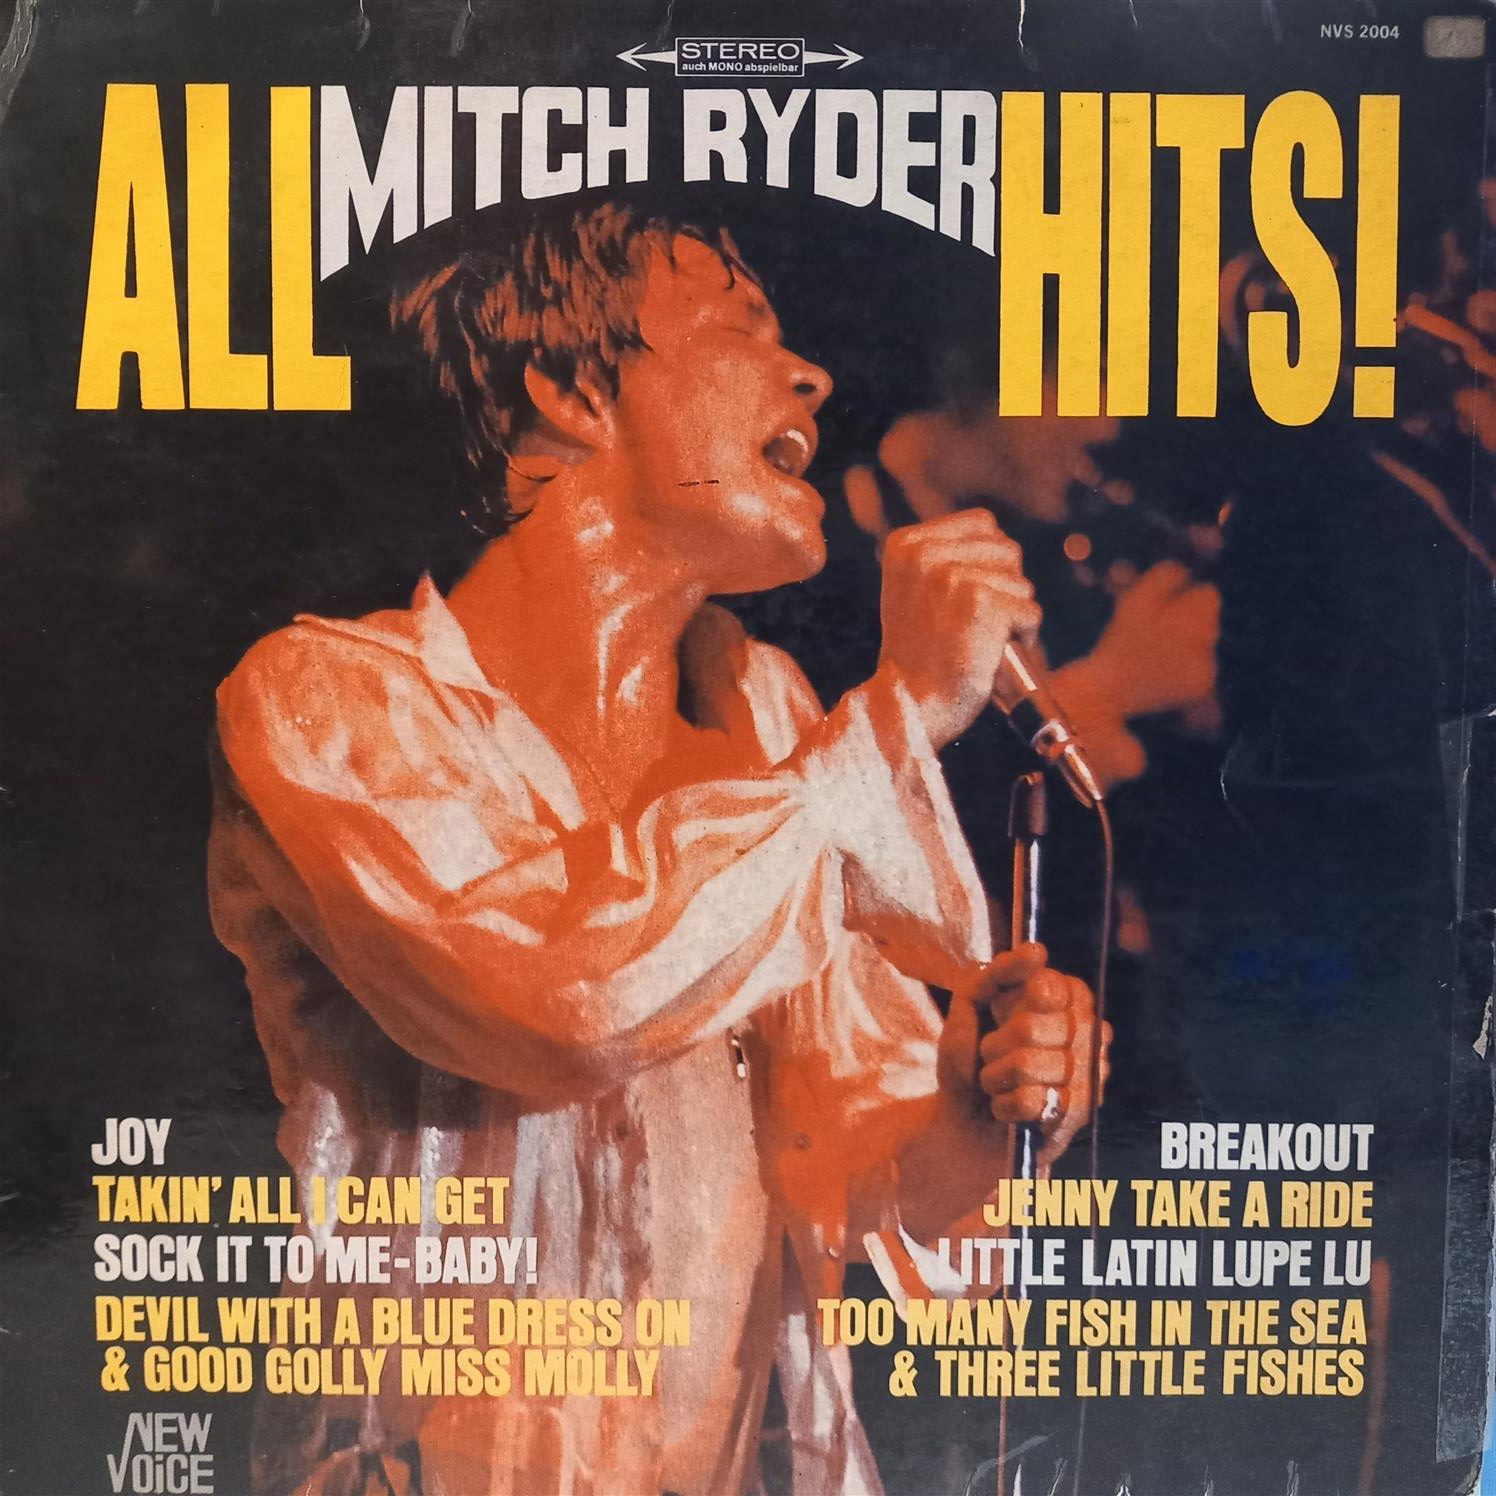 MITCH RYDERS – ALL MITCH RYDERS HITS! ON